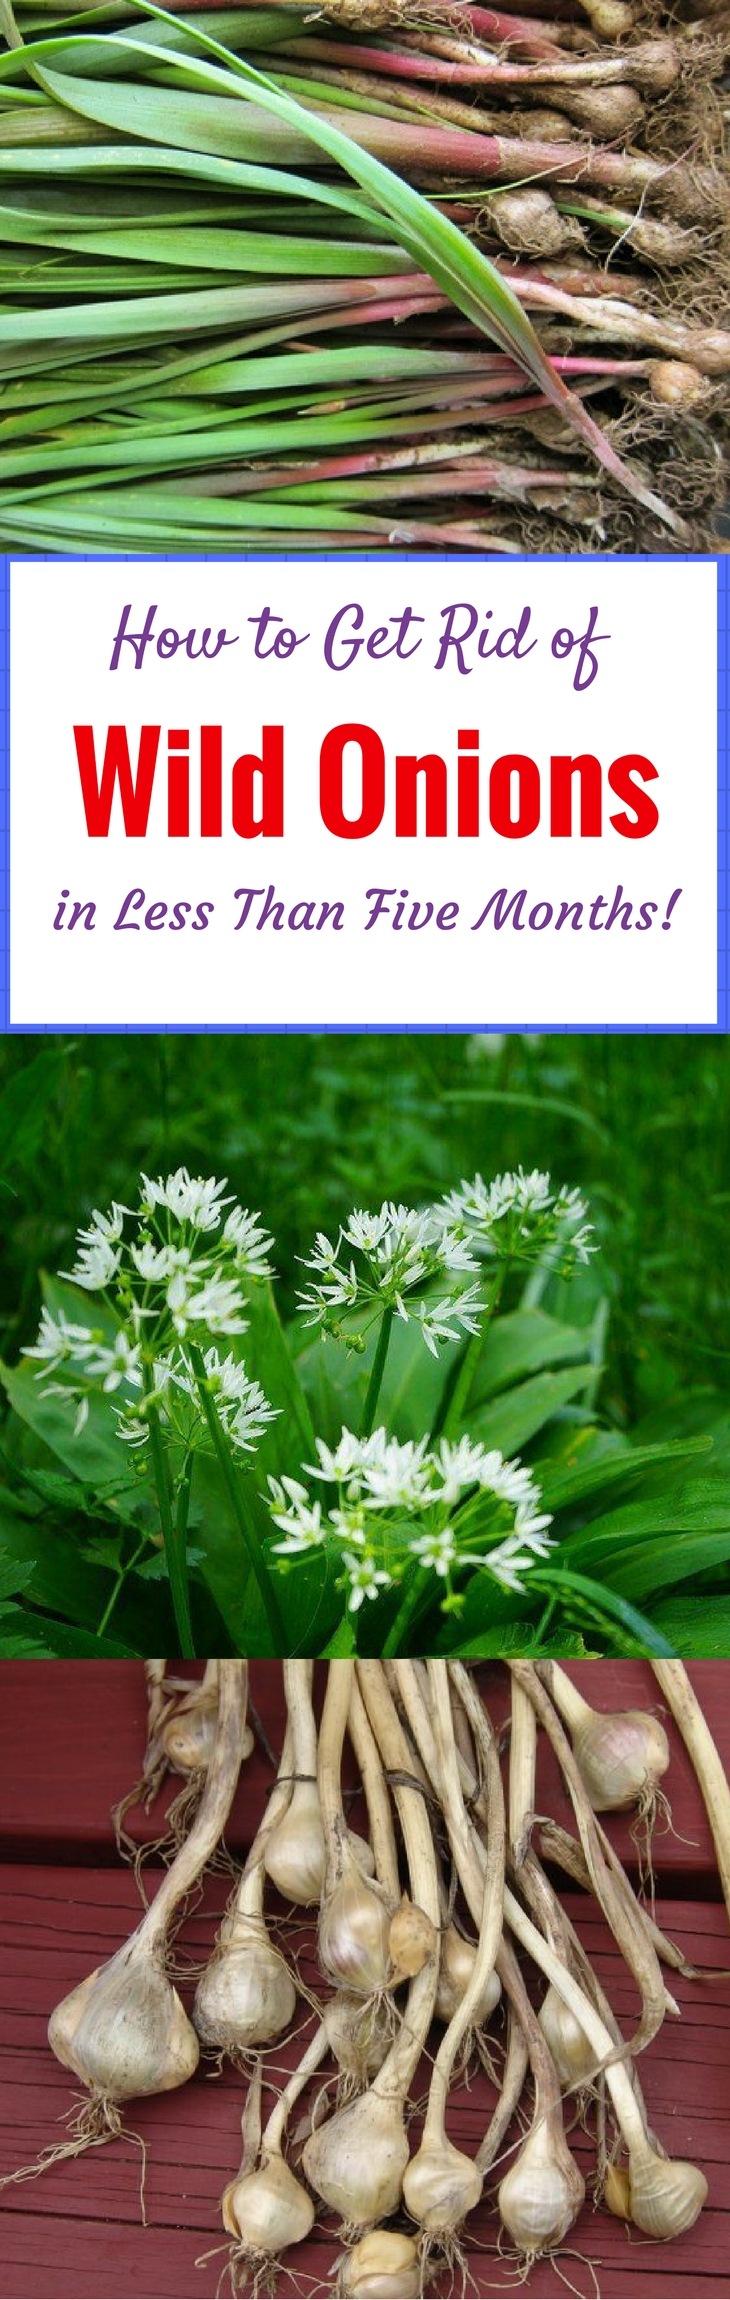 How to Get Rid of Wild Onions in Less Than Five Months!